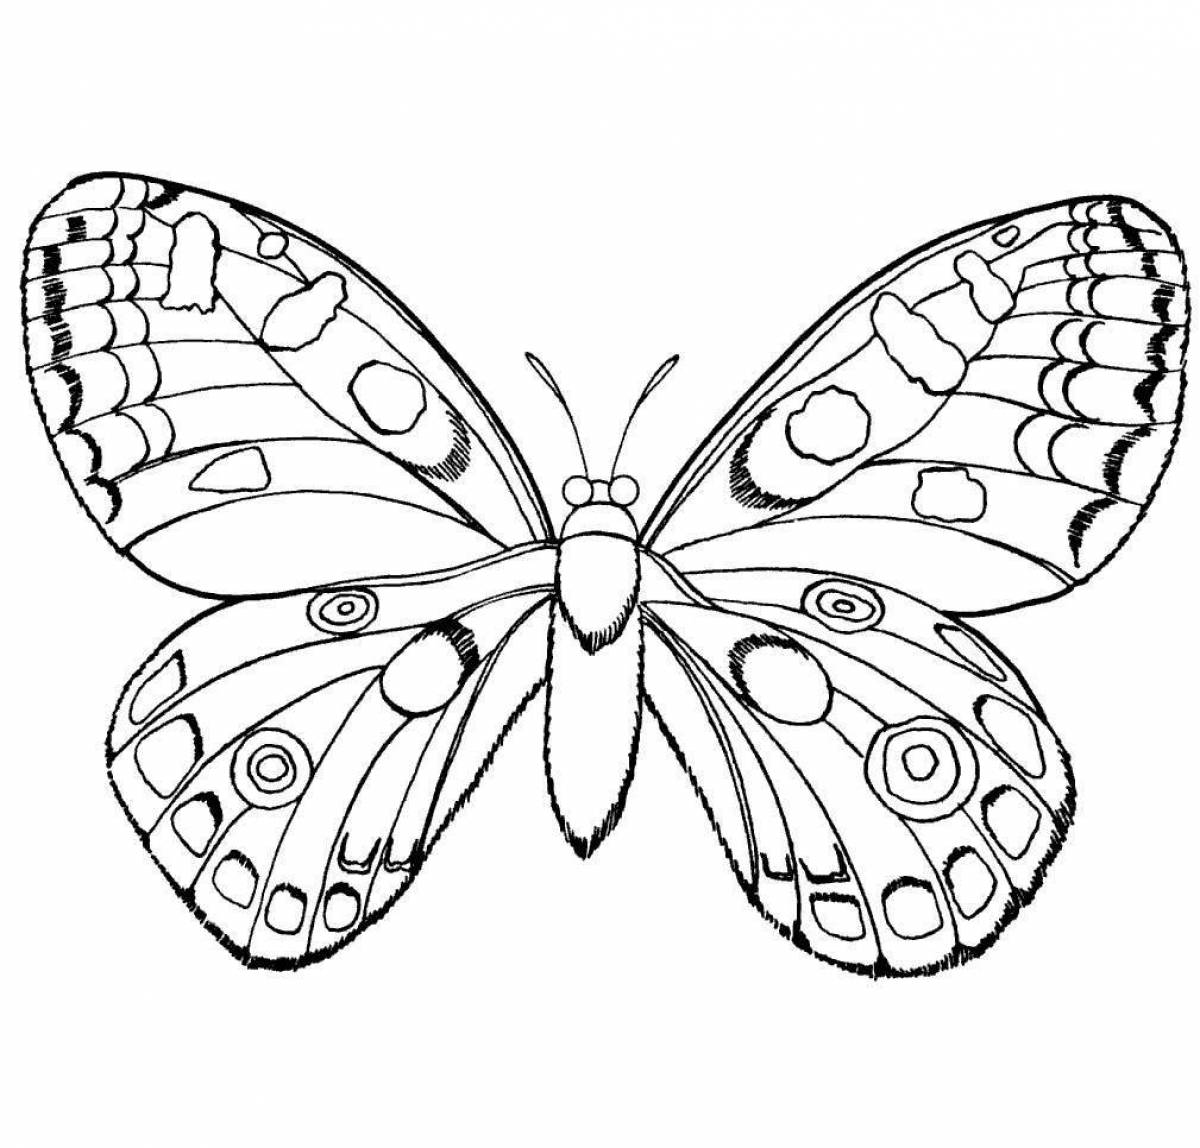 Fabulous butterfly coloring book